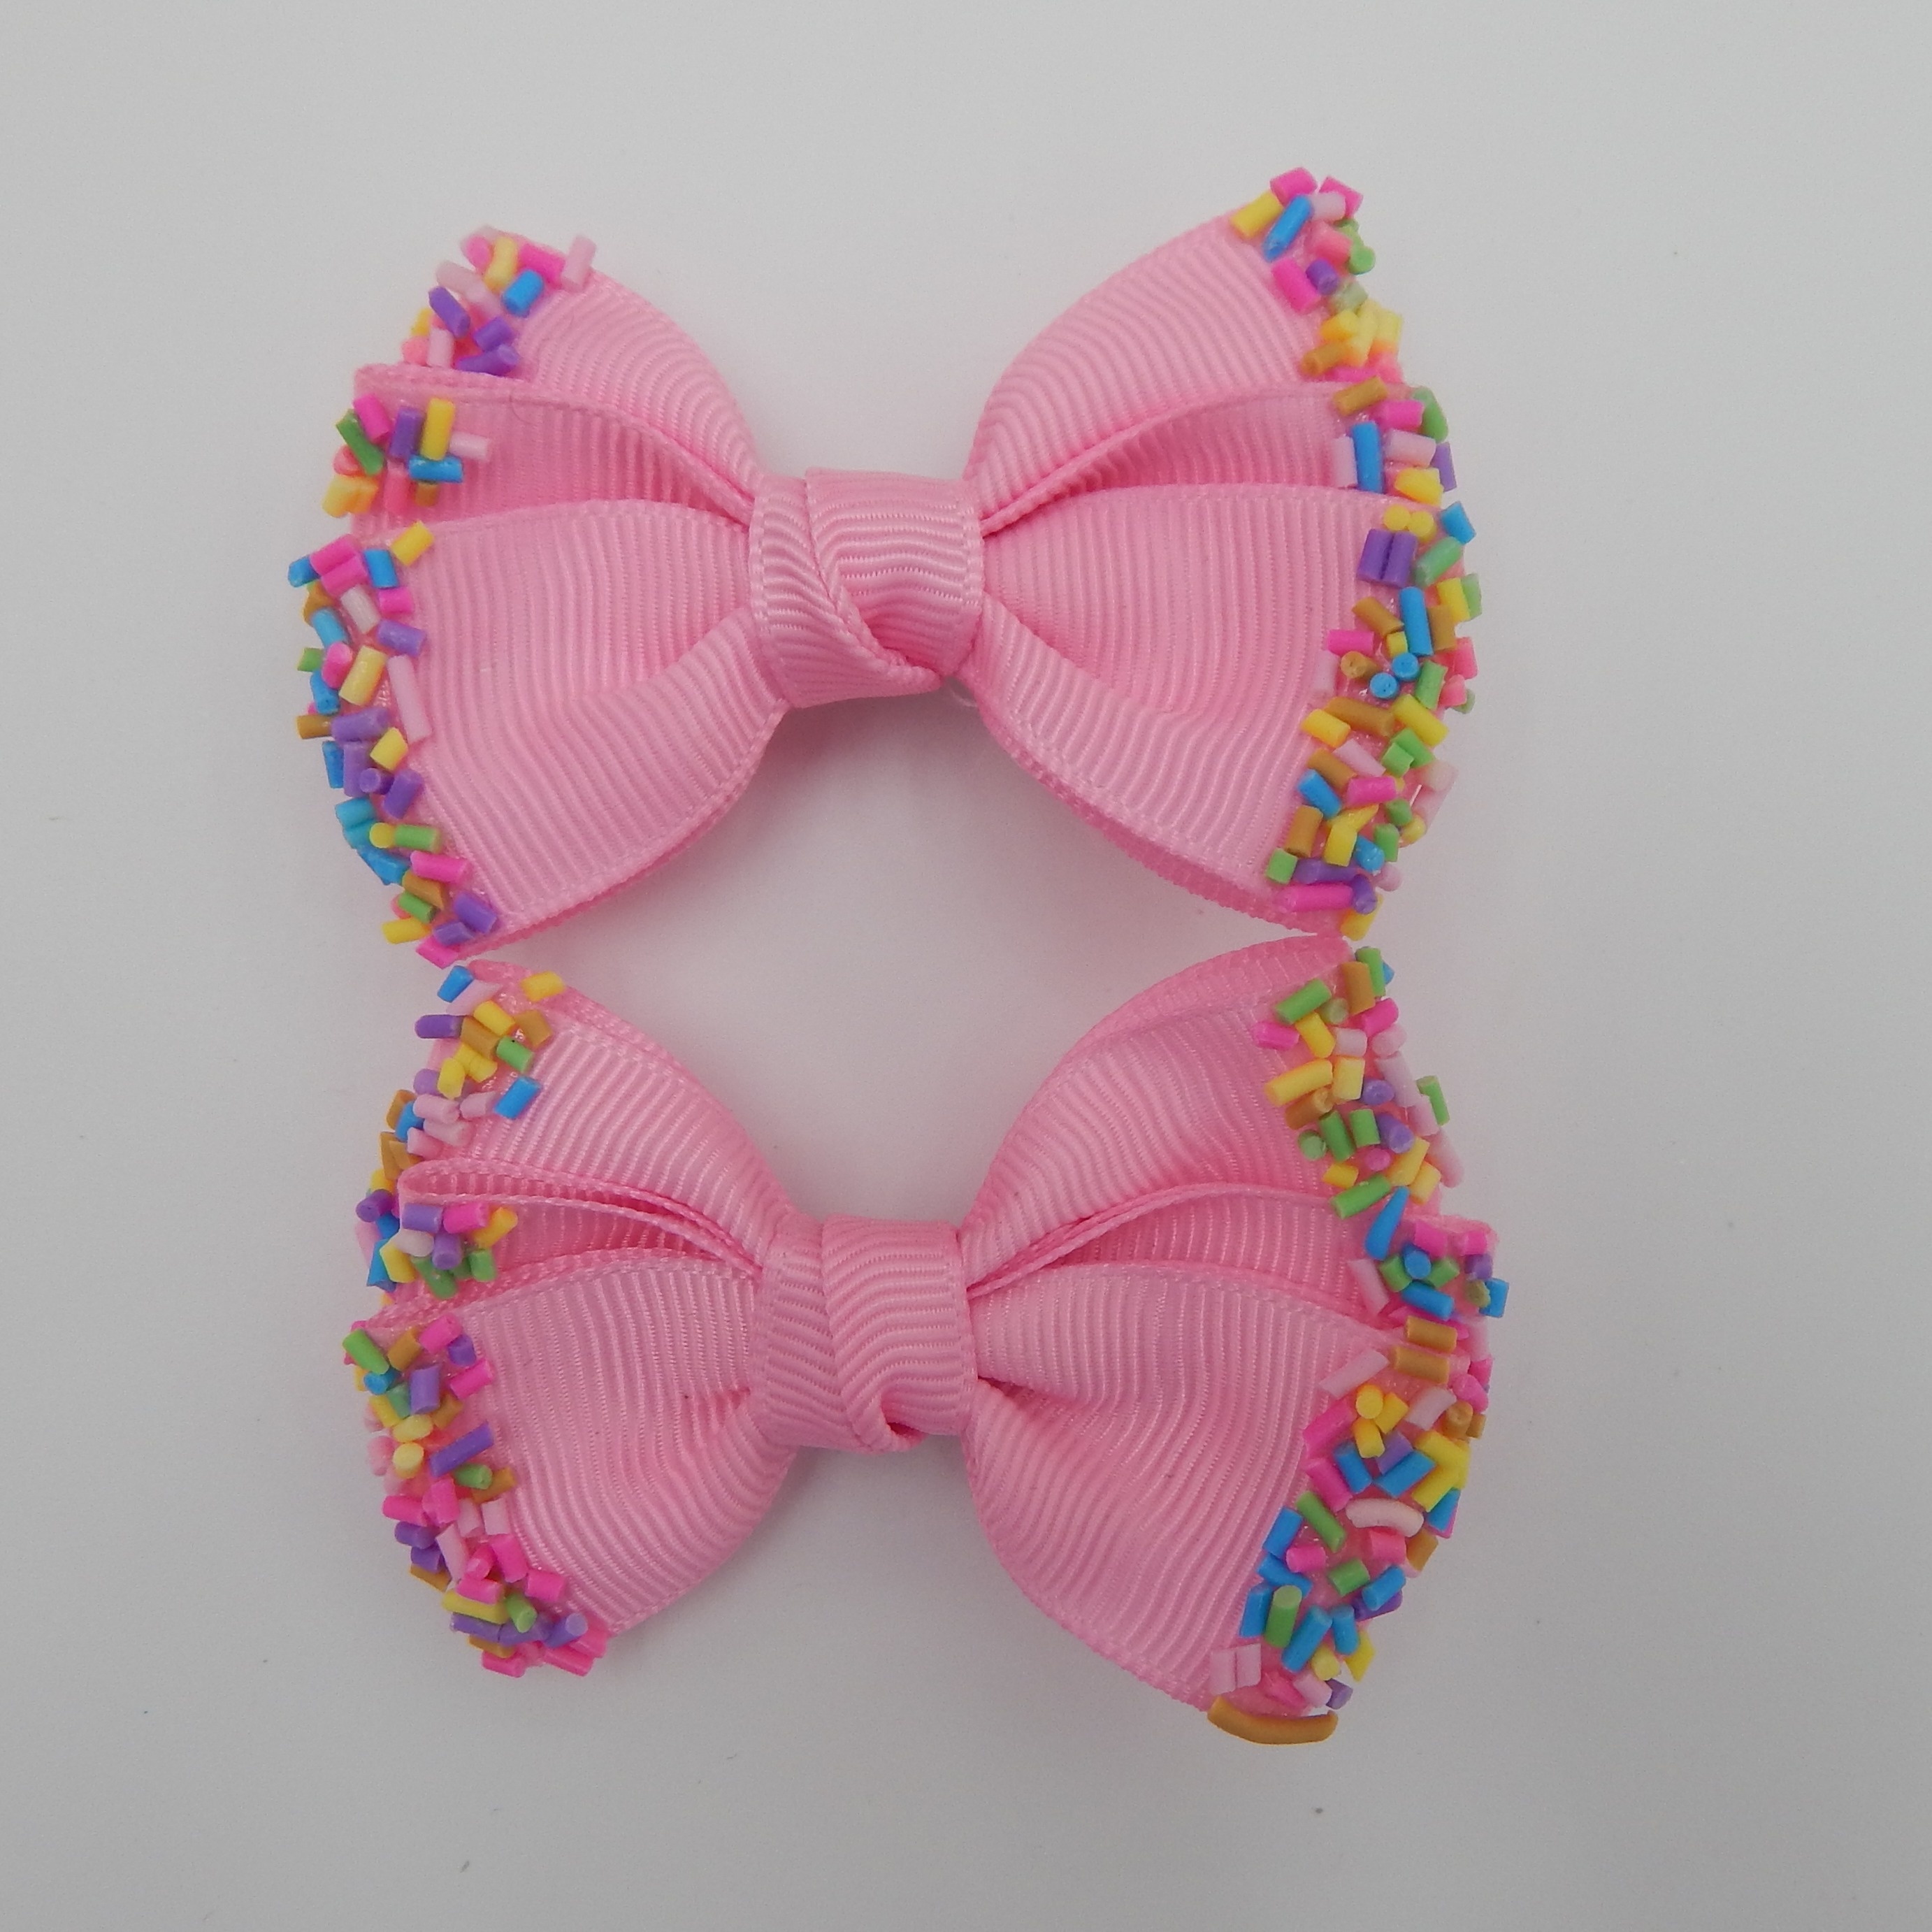  Bow Hair Clips for Girls Pink Hair Bow Barrettes for